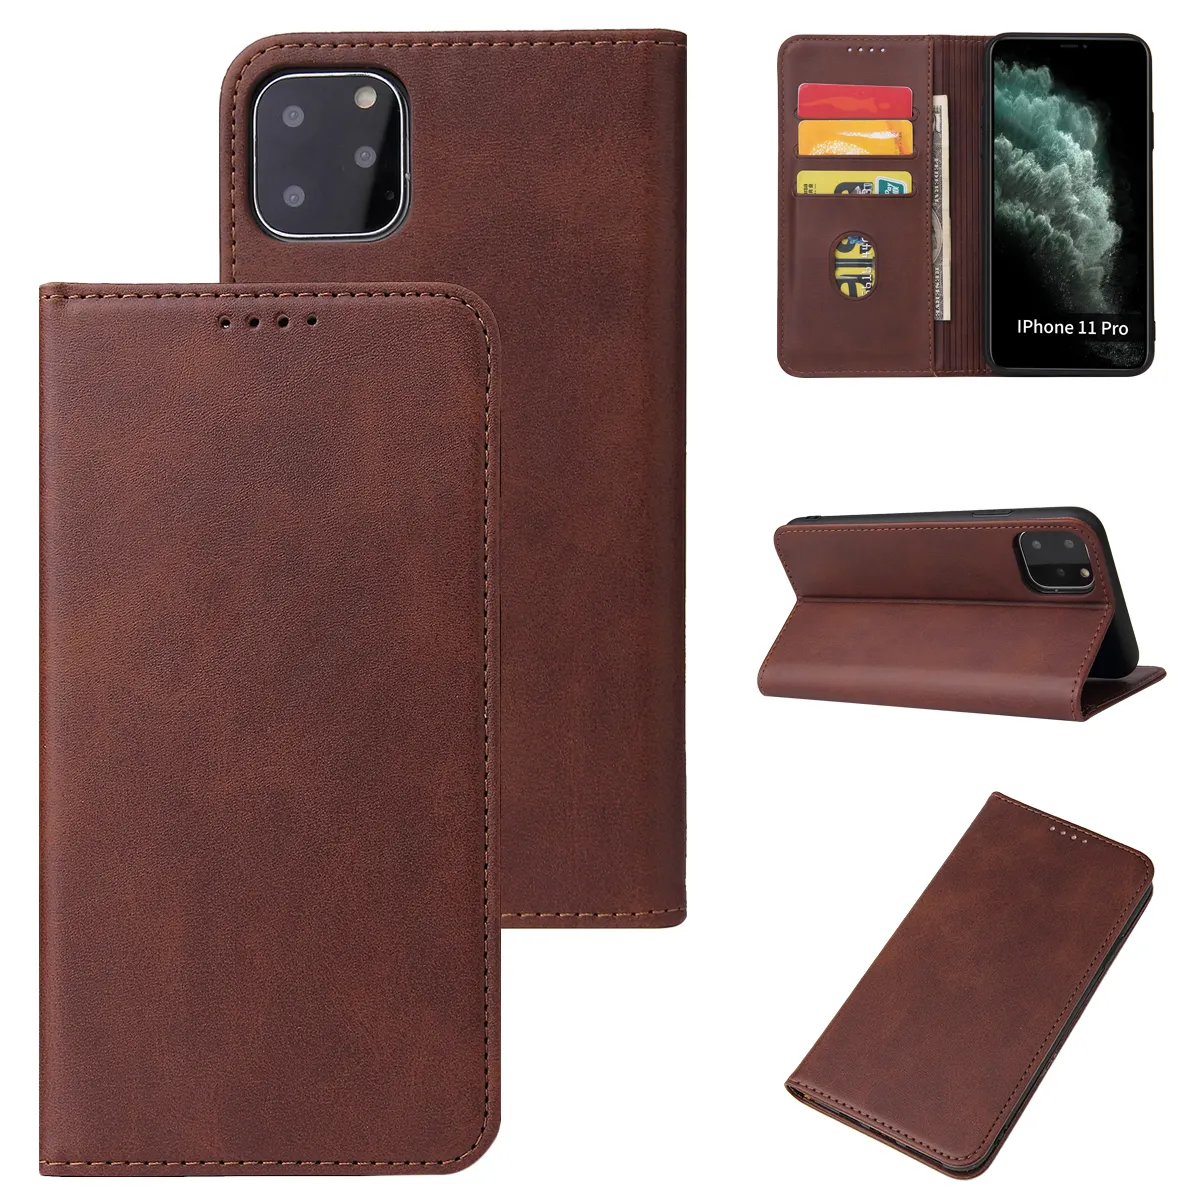 ShanHai Luxury Leather Case with Slim Back Cover Card Holder Wallet for iPhone 12 11 Pro X Xr Xs Max 8 7 6 6s Plus